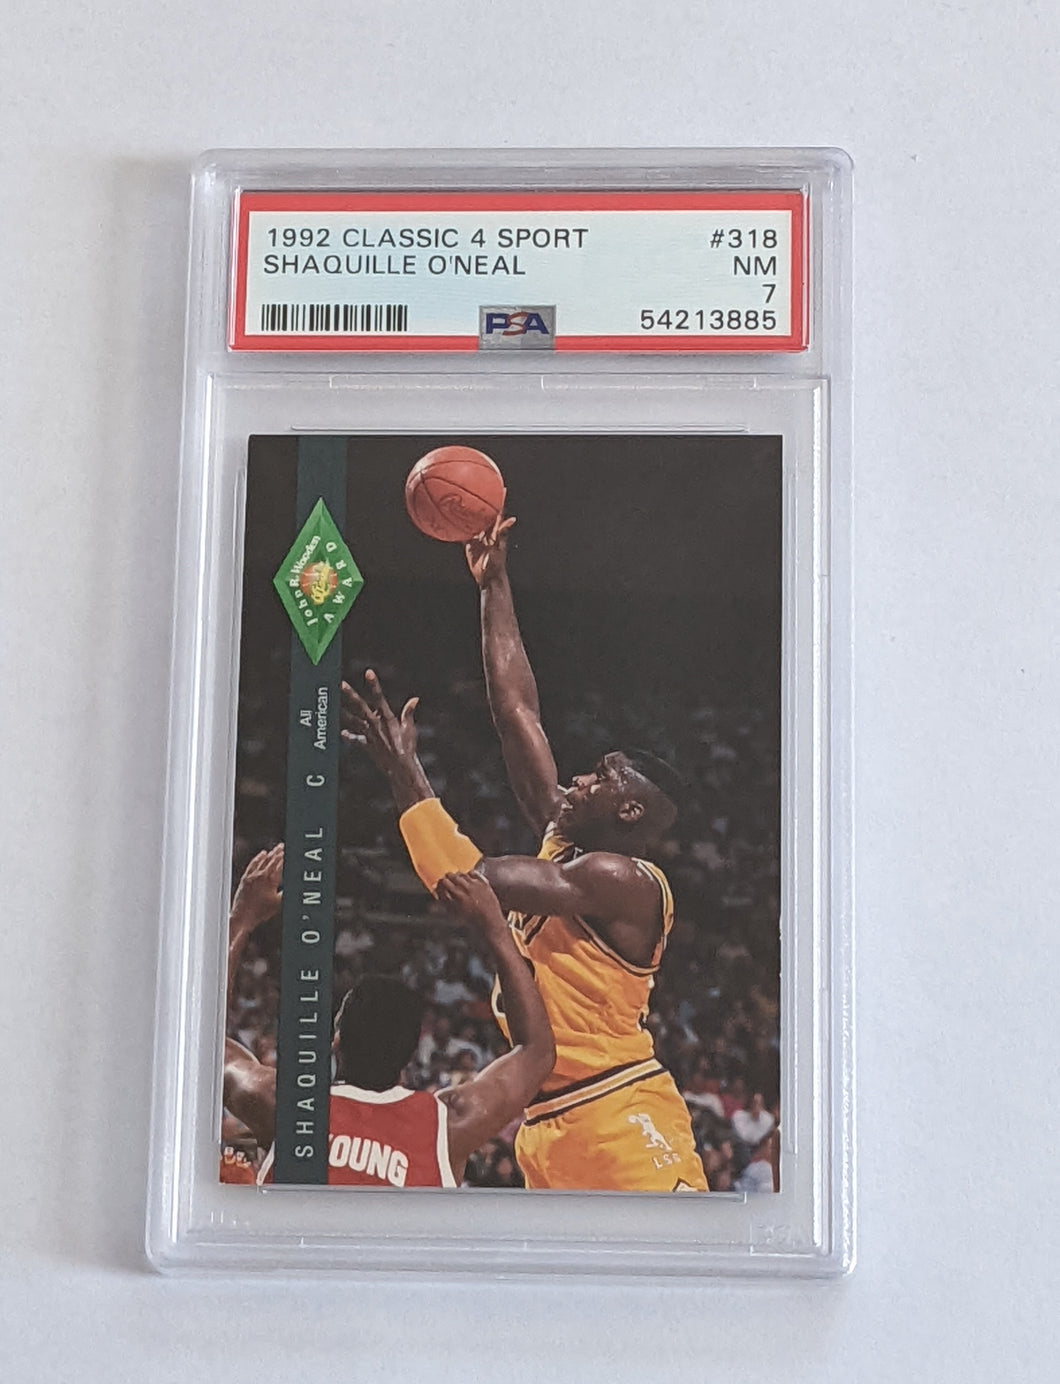 1992 Classic 4 Spot Shaquille O'Neal Card #318